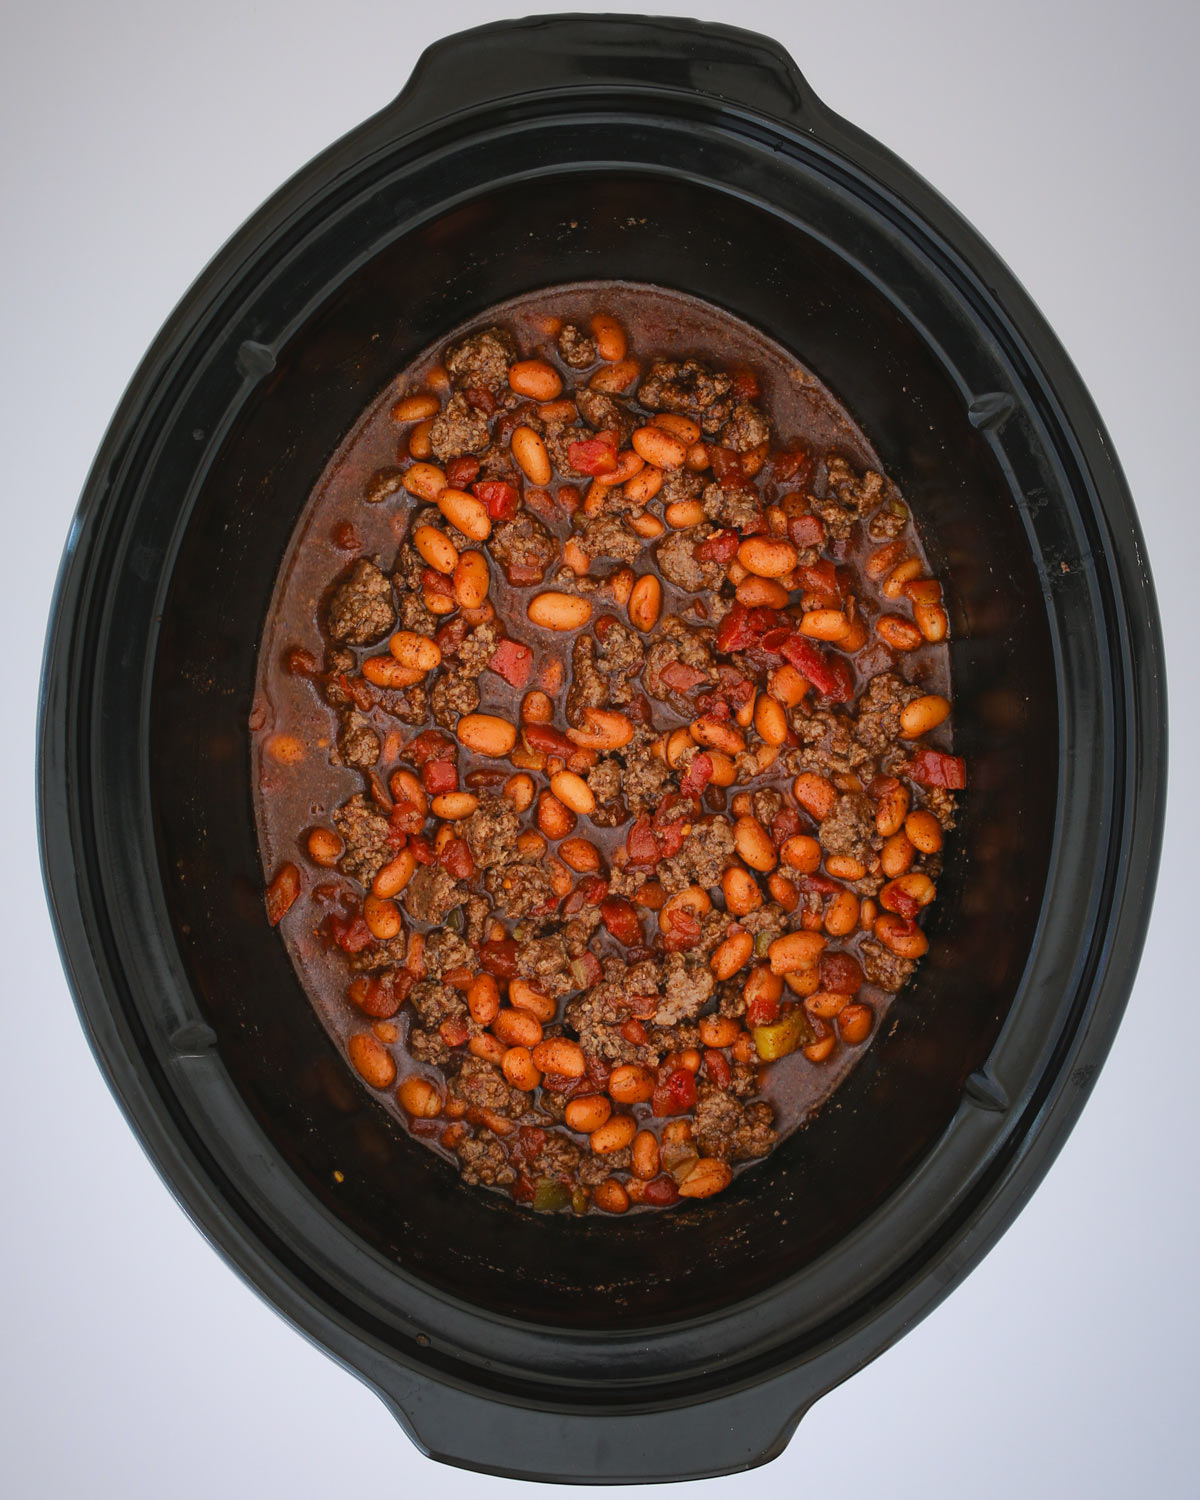 all the beans, meat, and spices mixed in the slow cooker.